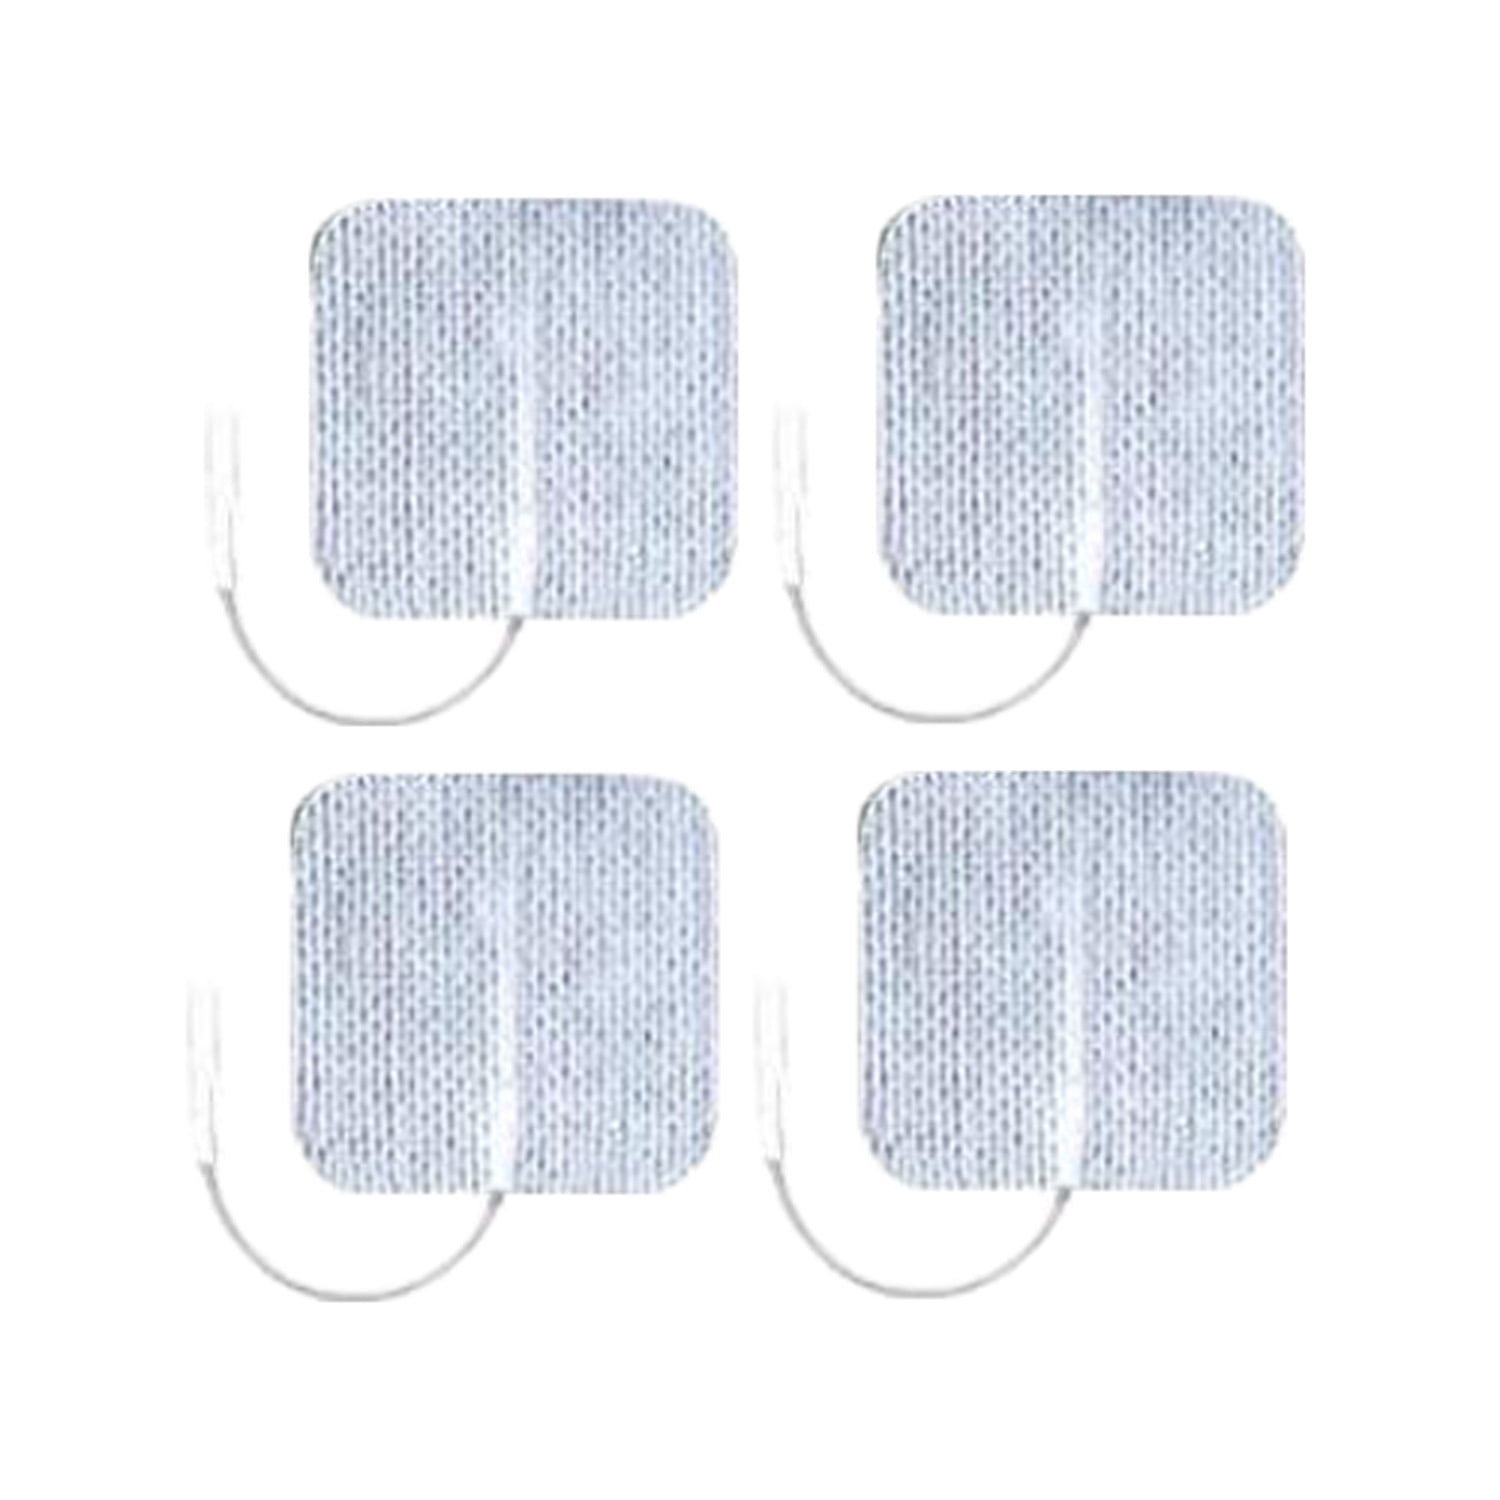 Syrtenty TENS Unit Replacement Pads - Pack of 16 Electrode Squares for  Muscle Stimulation & Therapy - 2 x 4 Stimulator Pad Set